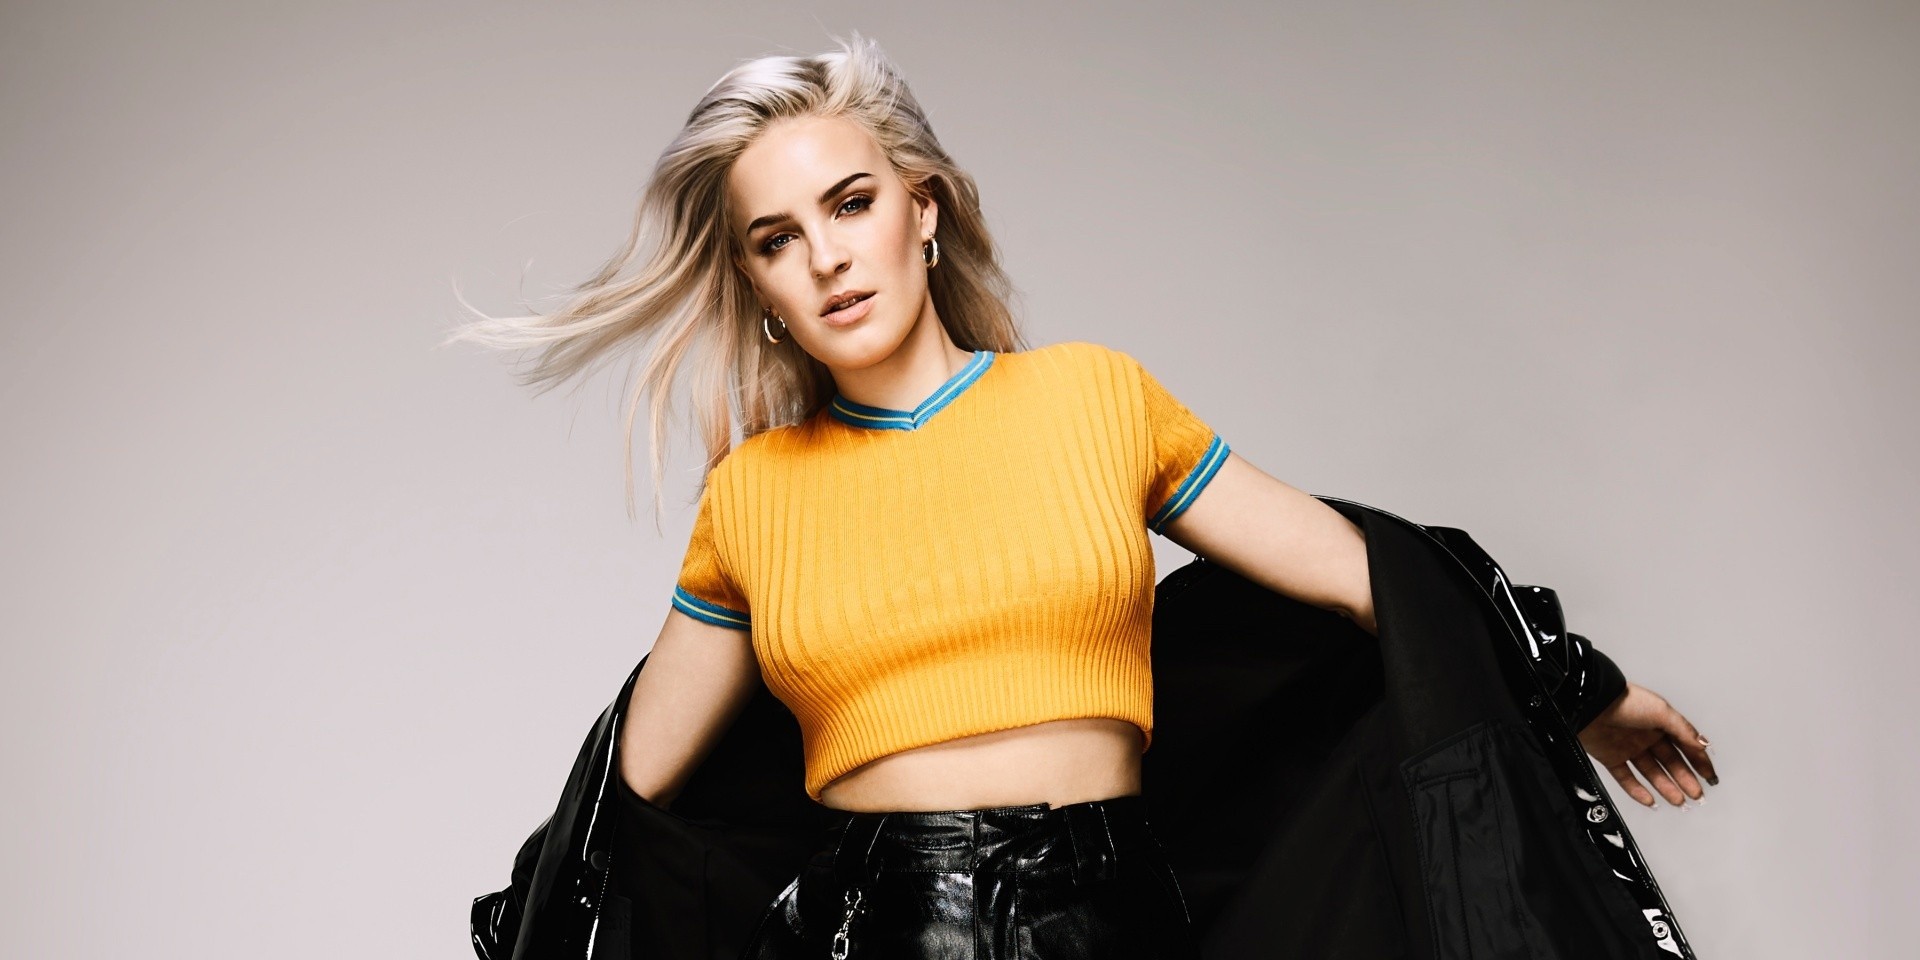 Anne-Marie will play her first-ever show in Singapore this October